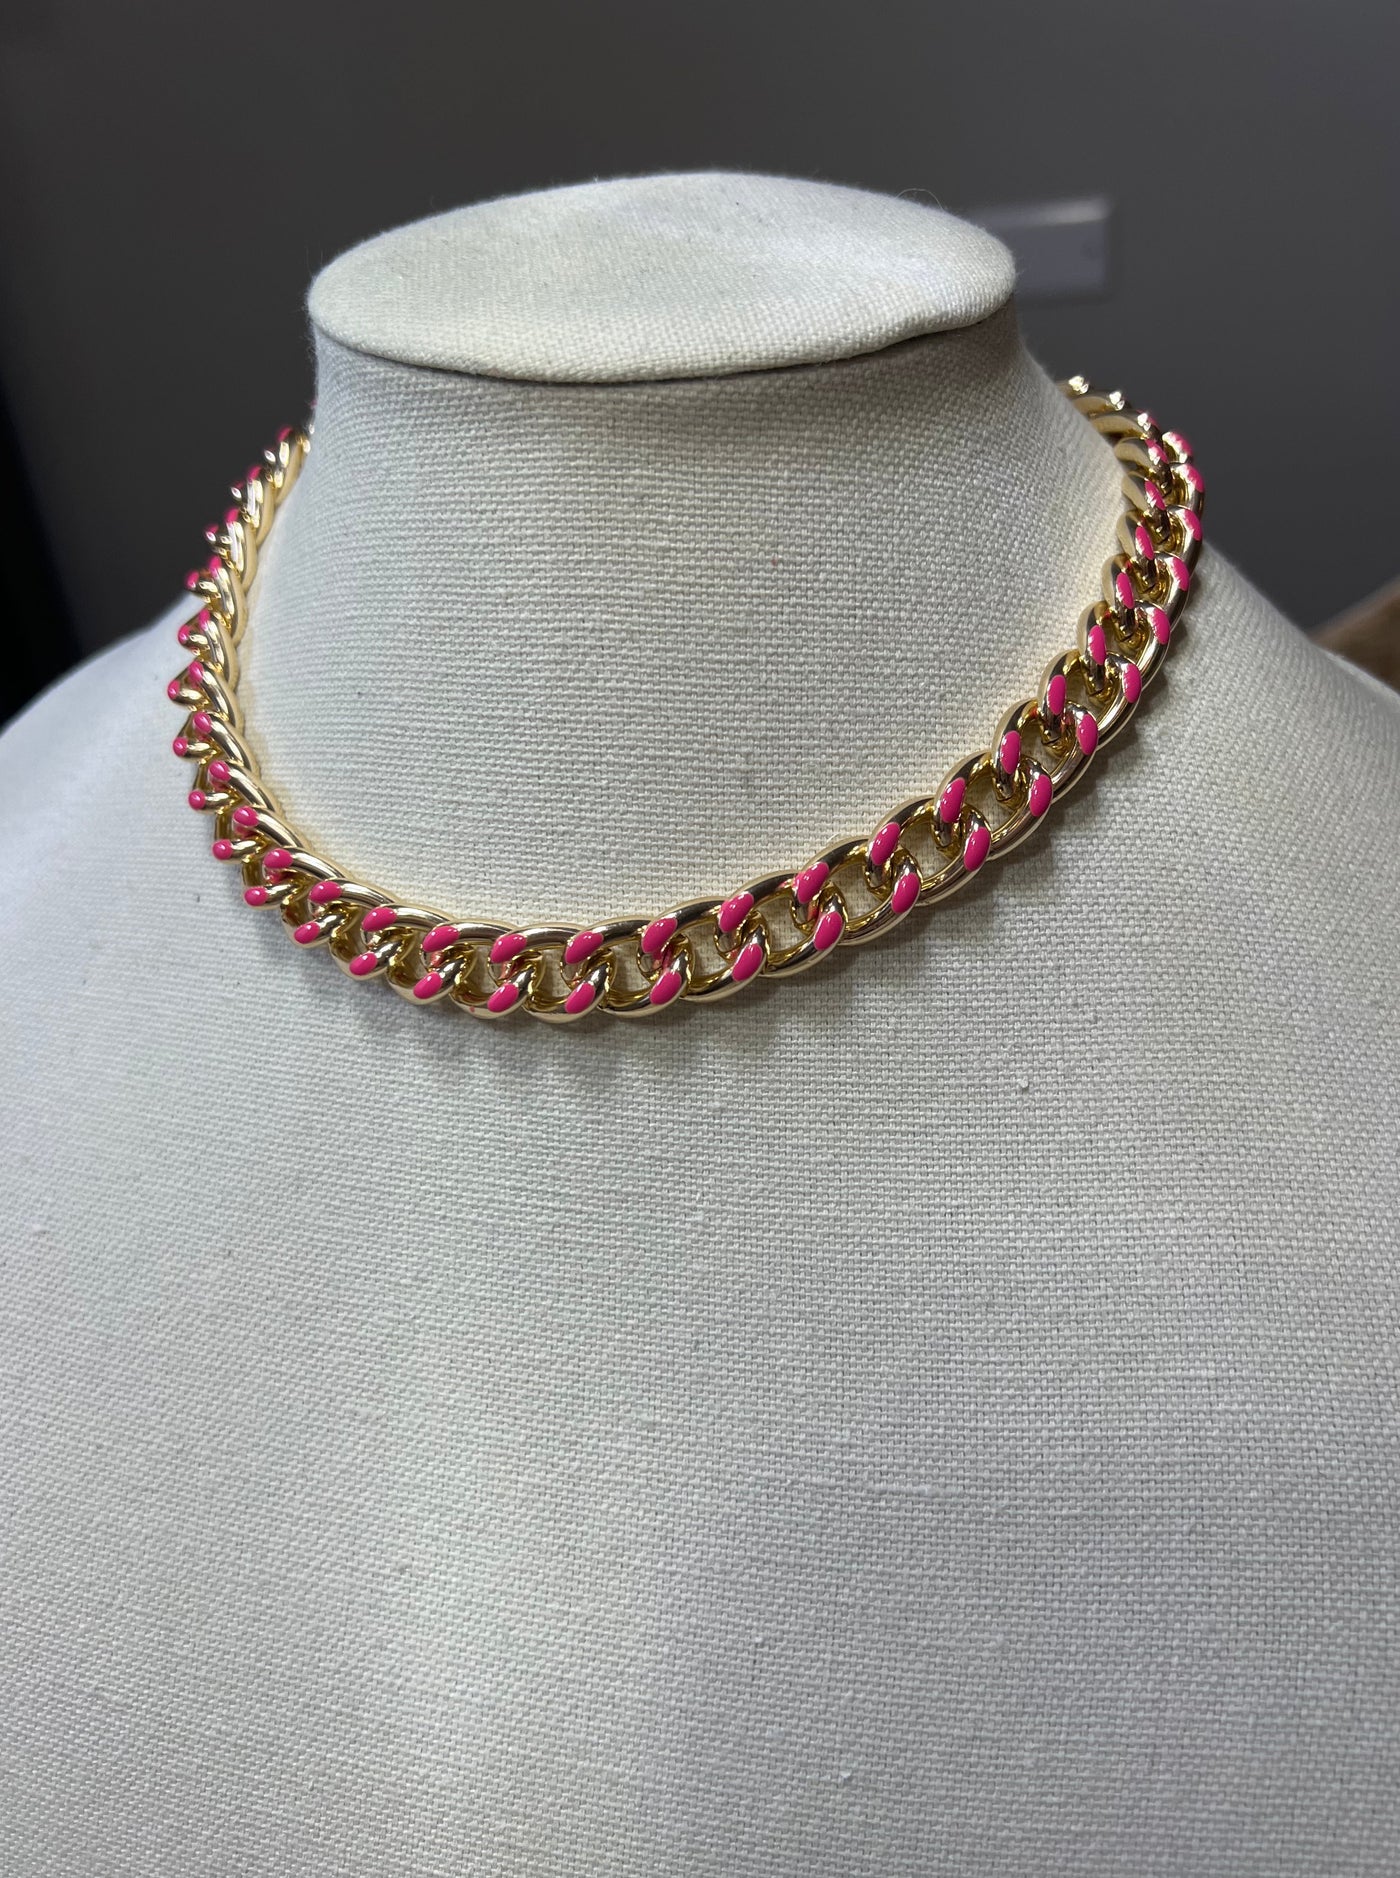 Pink Chain Necklace